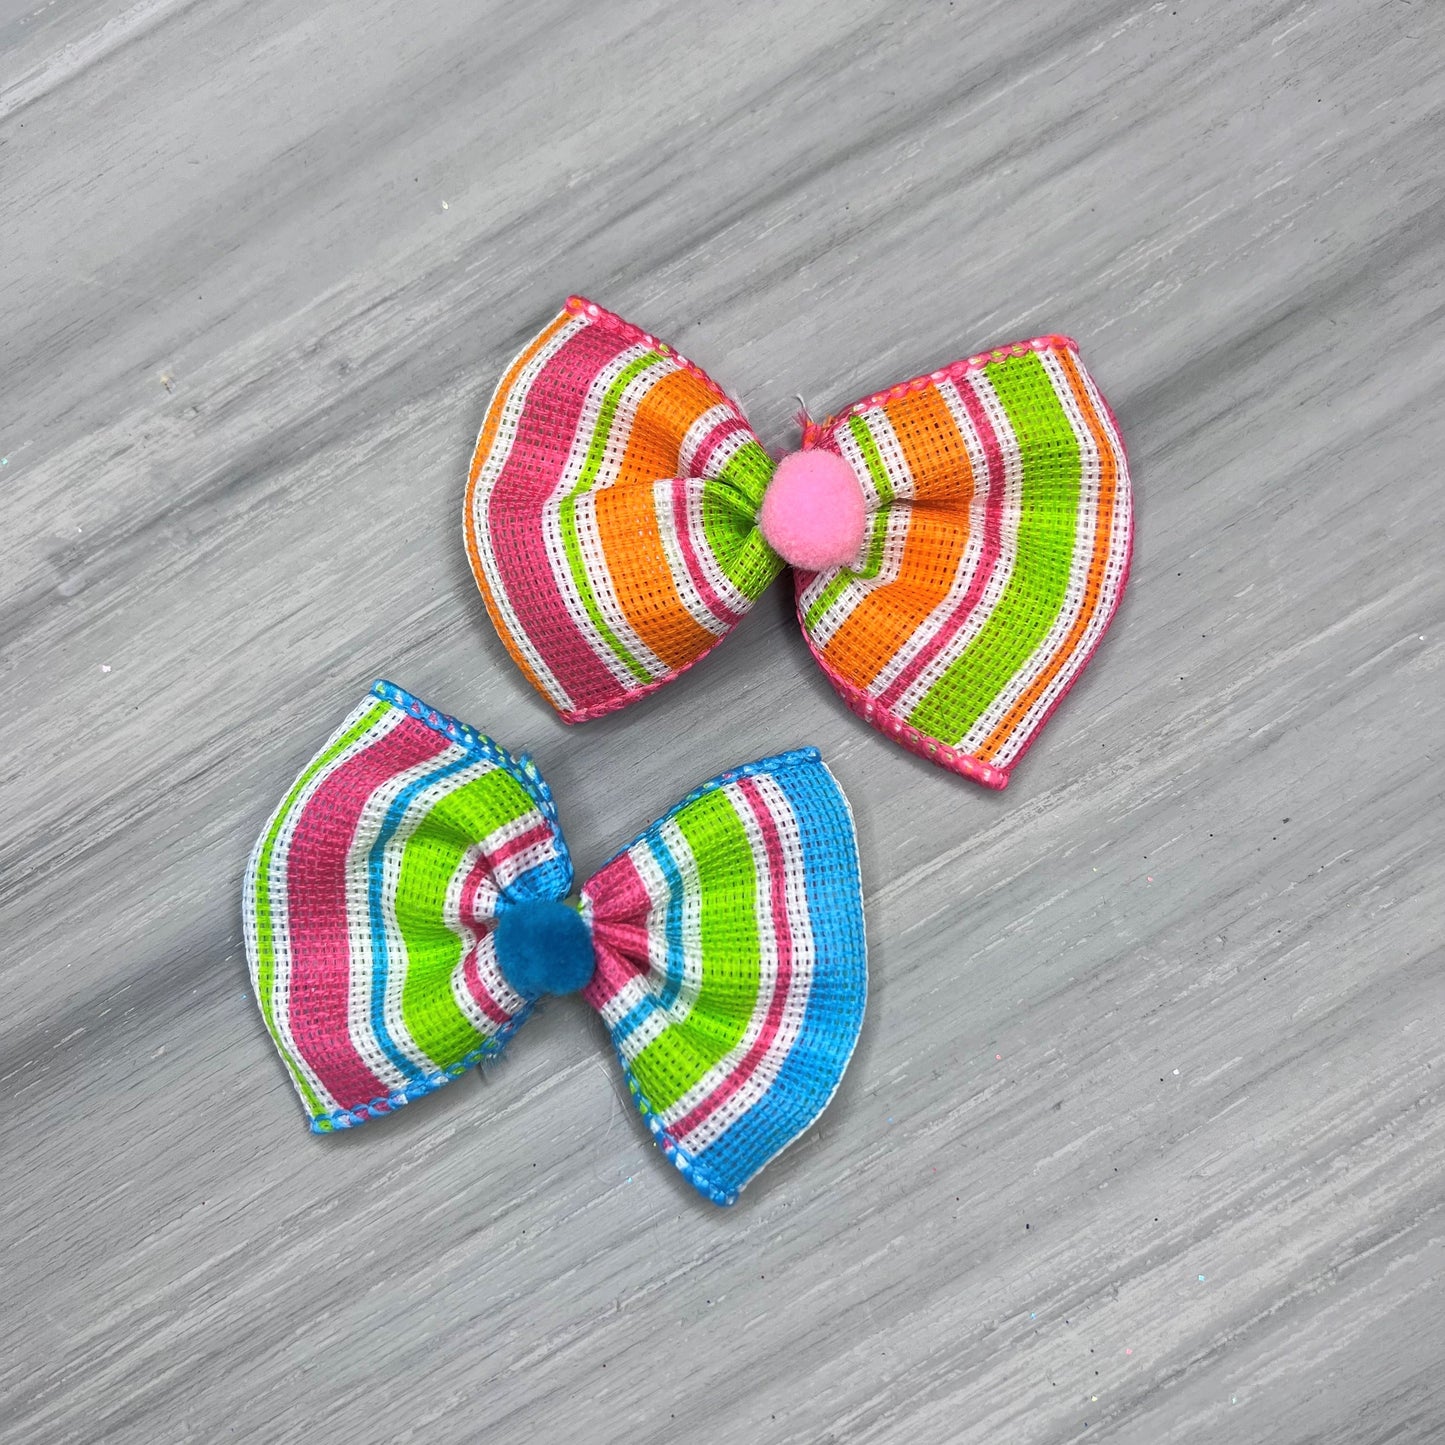 Beach Ball - Over the Top - 12 Large Bows